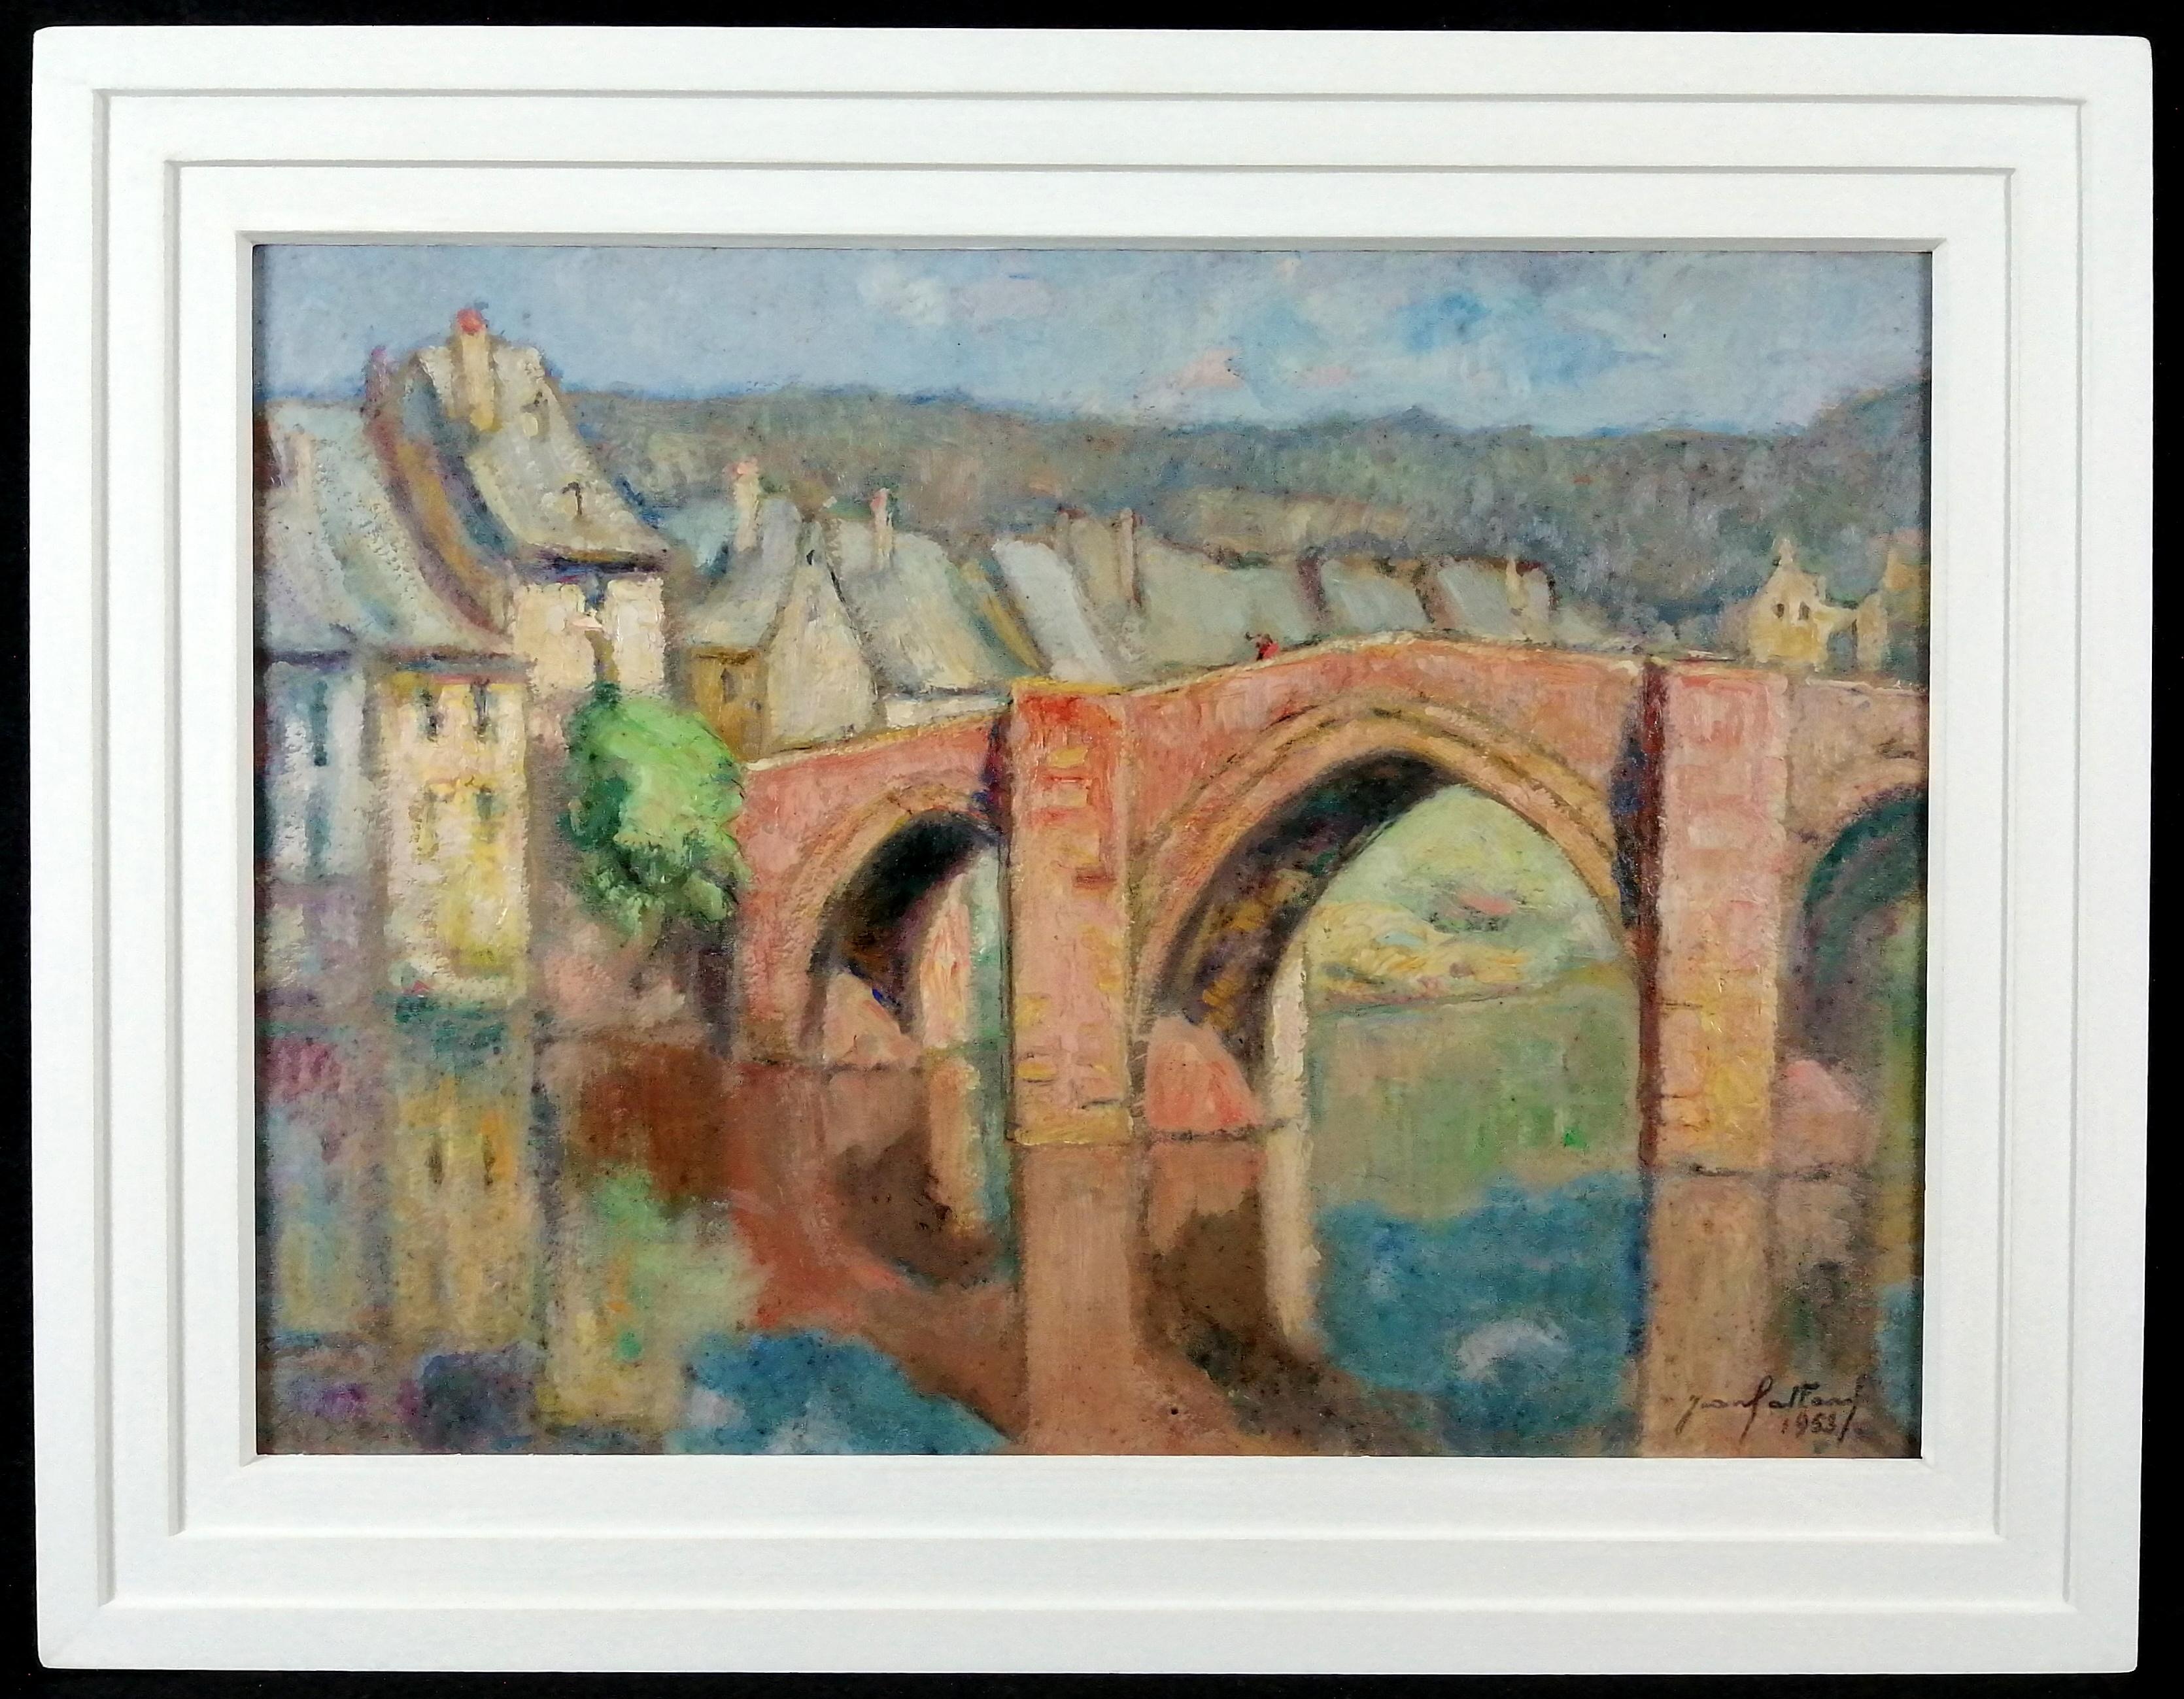 A beautiful signed and dated 1953 French impressionist oil on board depicting a bridge reflecting in a river, by Jean Galland. The work is very atmospheric and superbly painted. Signed lower right and presented in a stepped painted frame.

Likely to